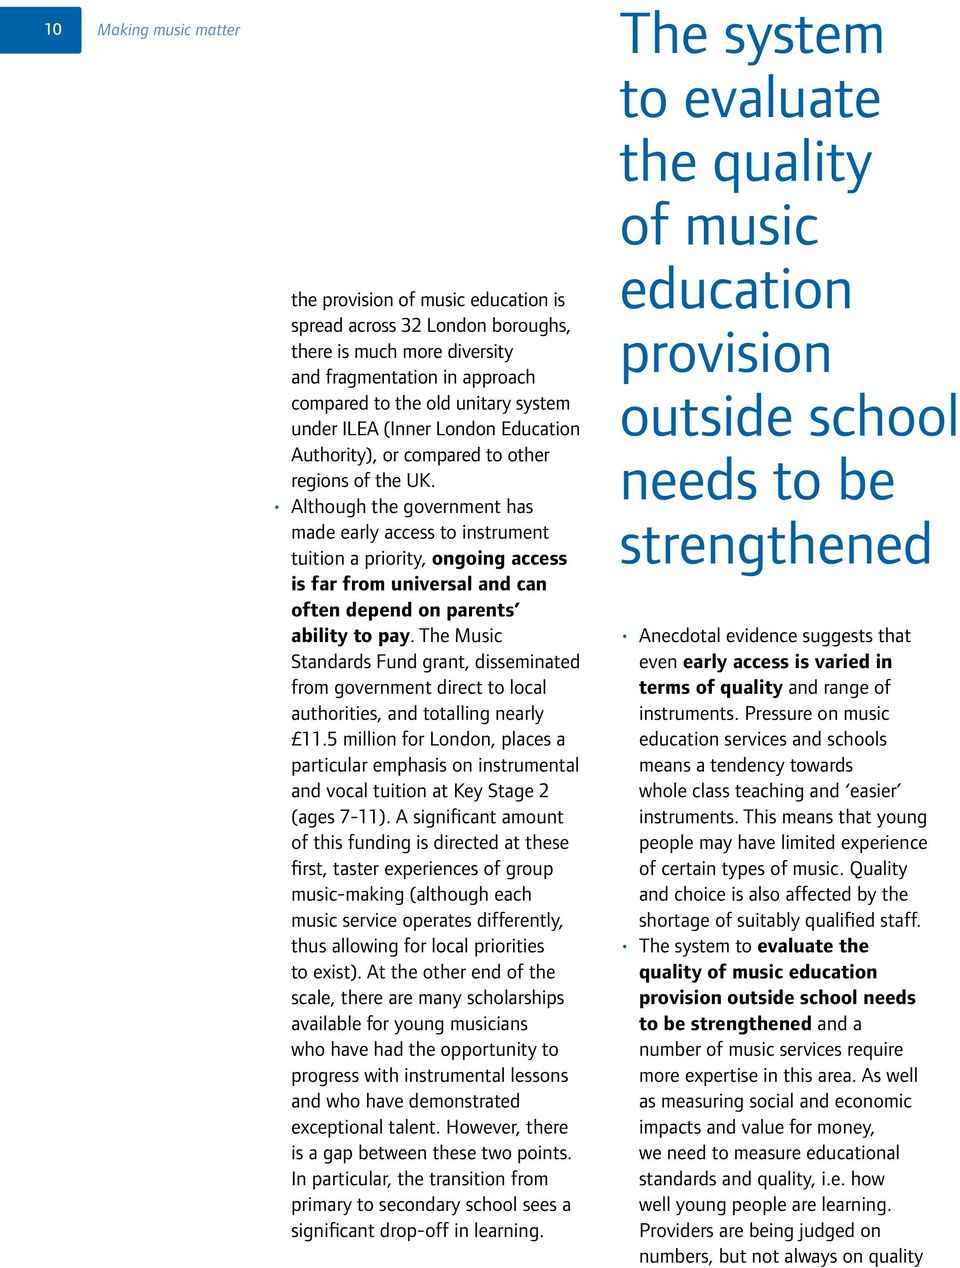 Although the government has made early access to instrument tuition a priority, ongoing access is far from universal and can often depend on parents ability to pay.